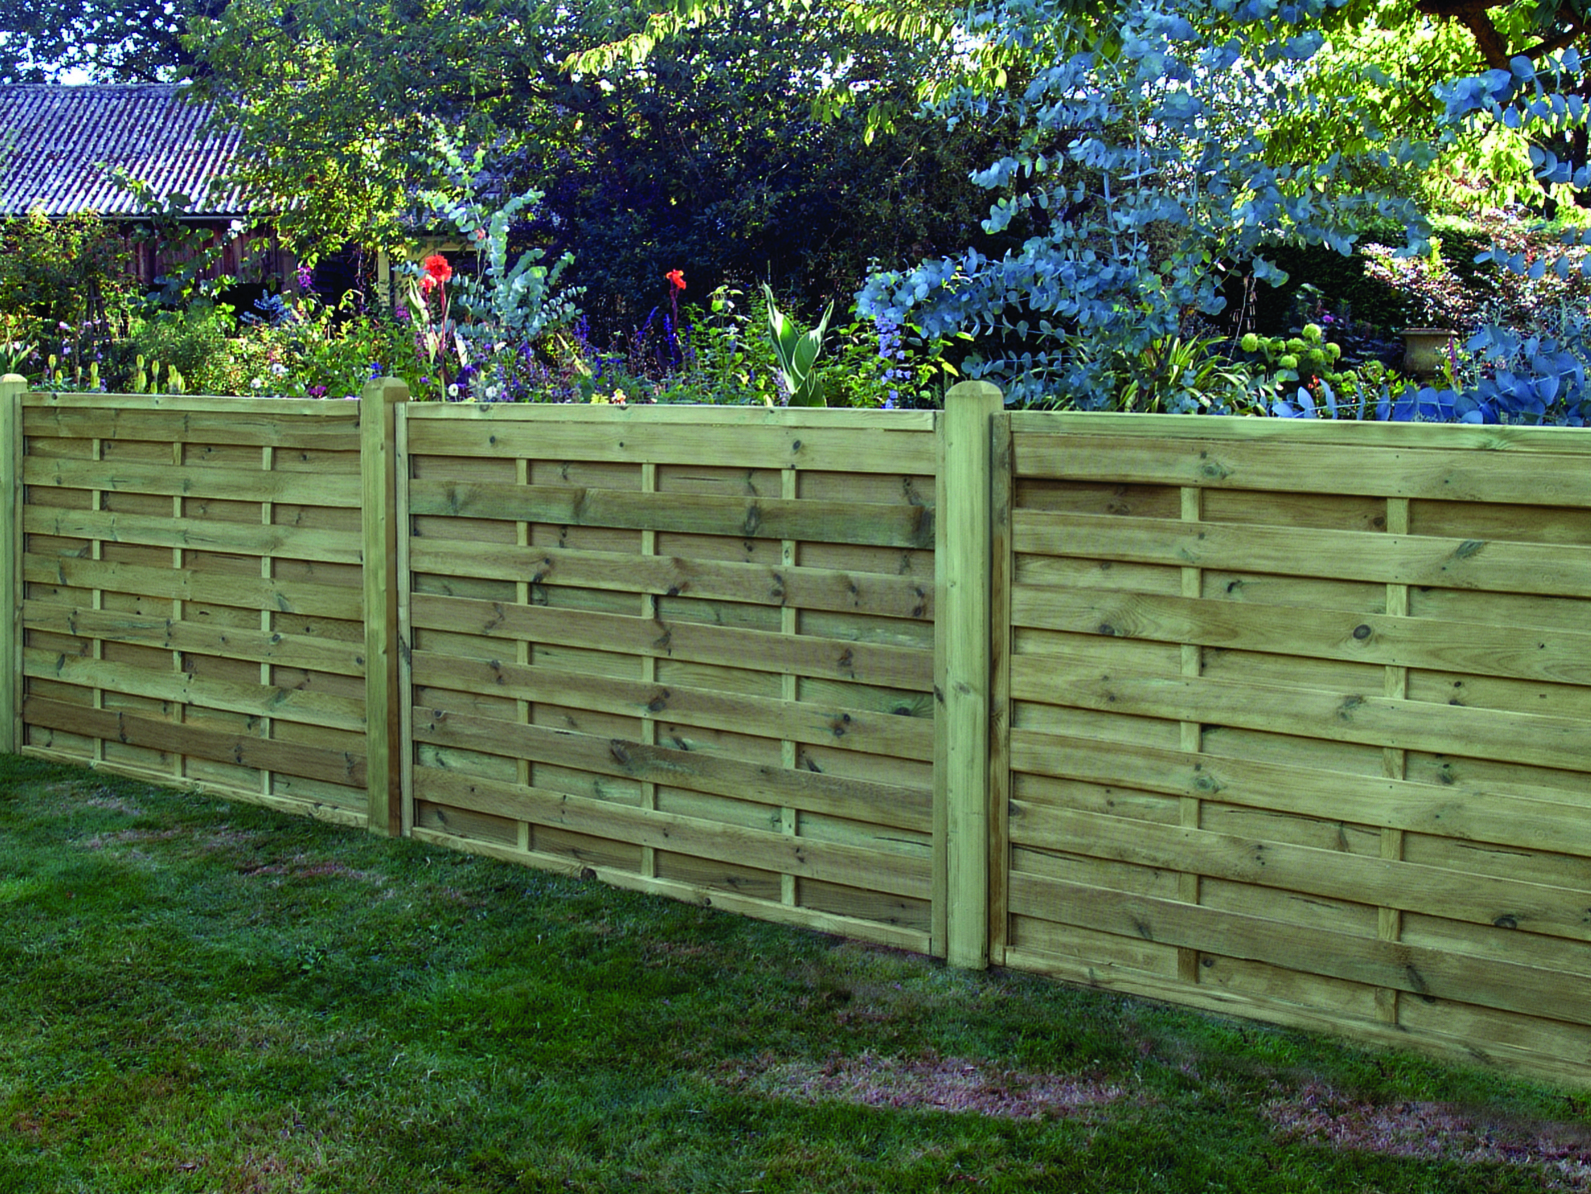 A fence in the garden